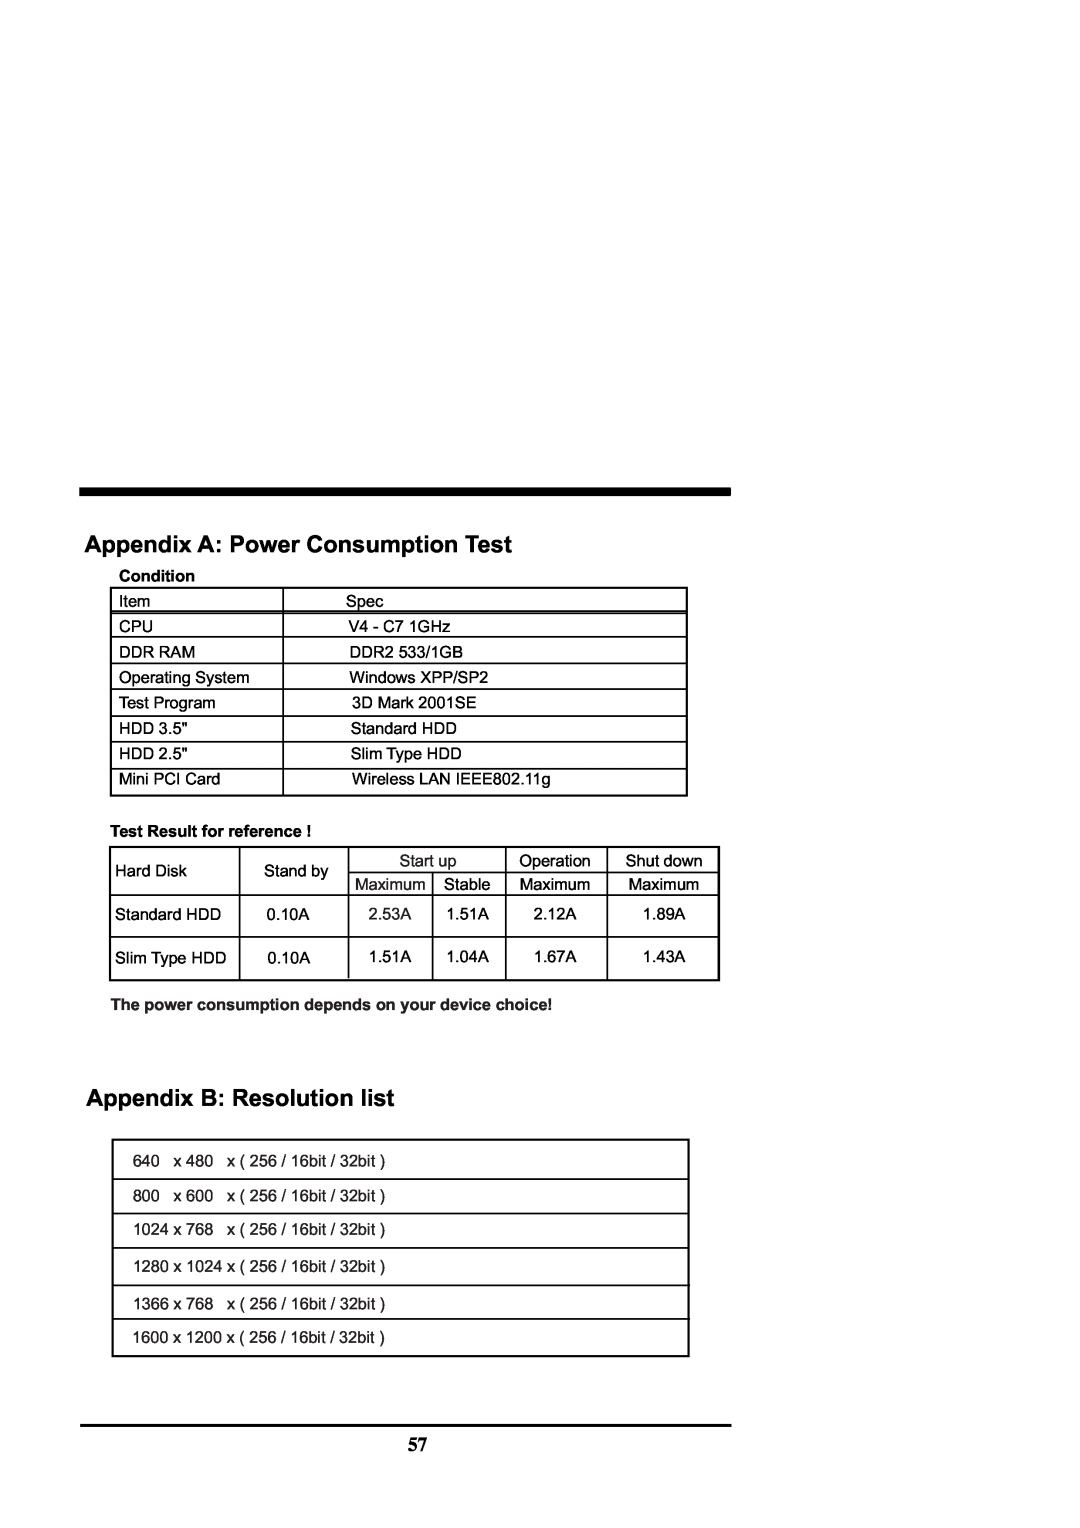 Intel CV702A, CV700A Appendix A: Power Consumption Test, Appendix B: Resolution list, Condition, Test Result for reference 